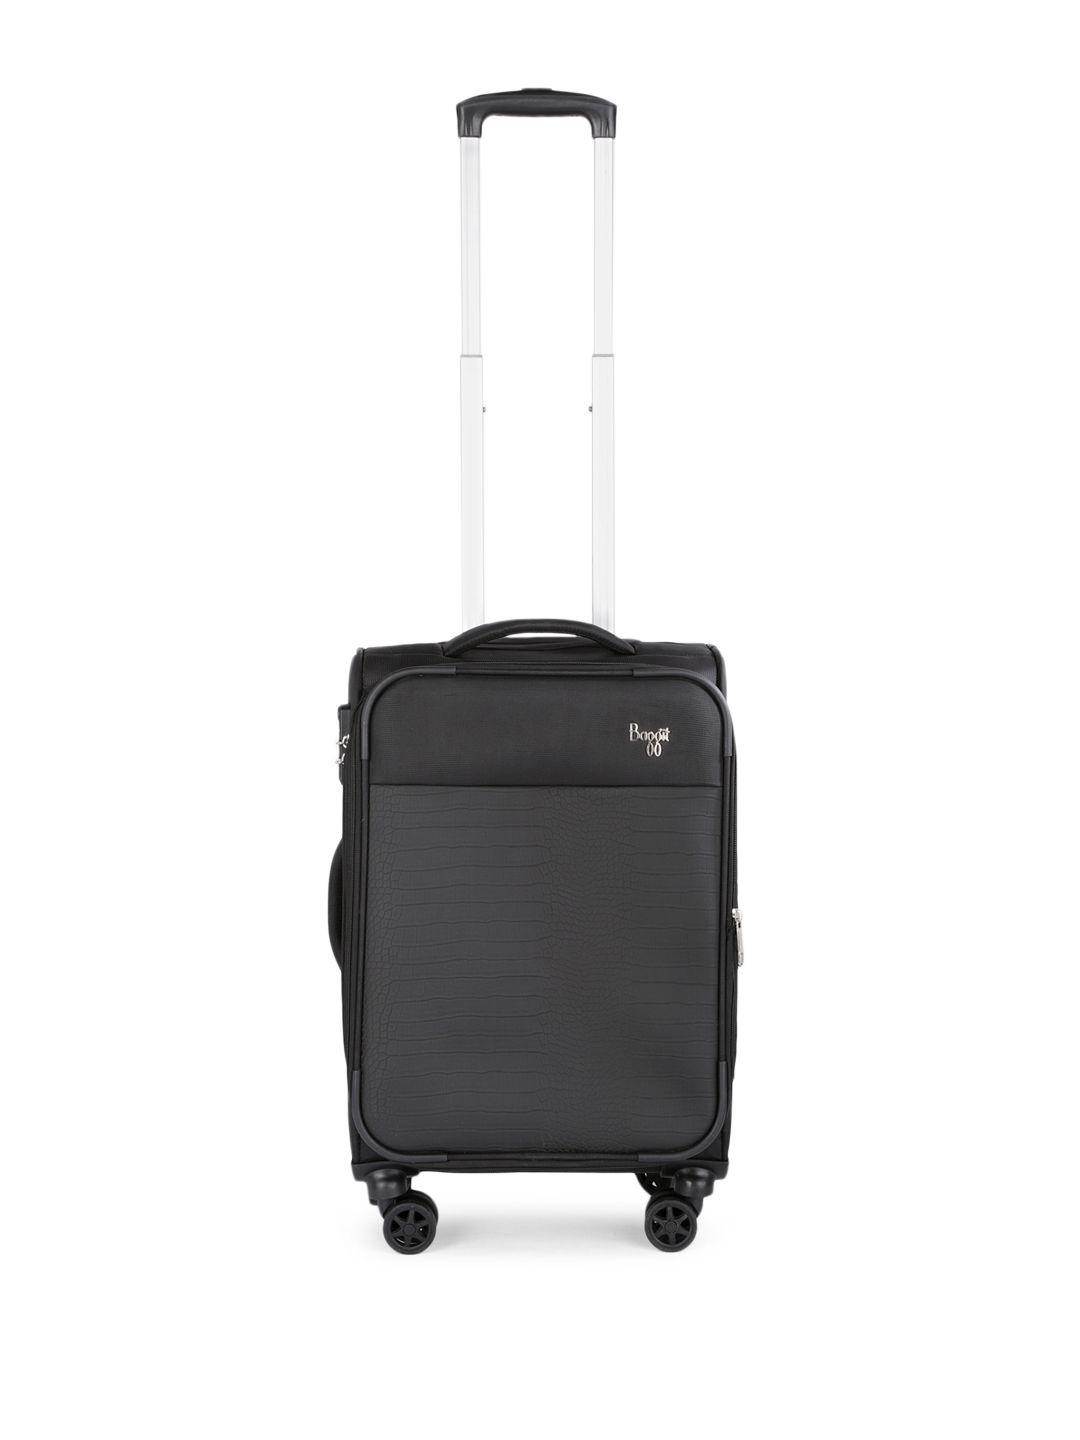 baggit ace textured soft-sided cabin trolley suitcase